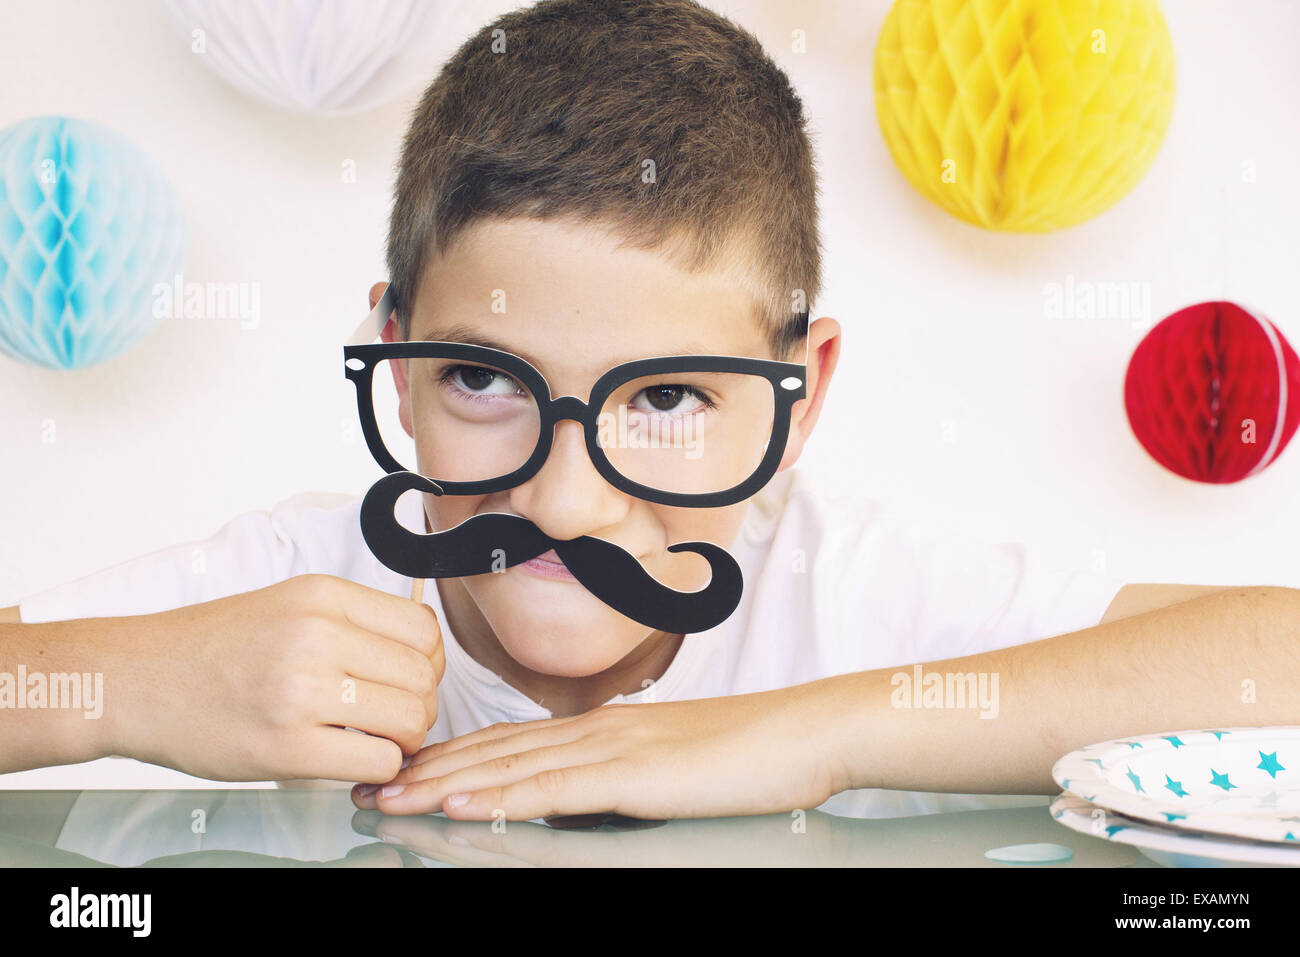 Boy wearing fake glasses and mustache at a birthday party, portrait Stock Photo